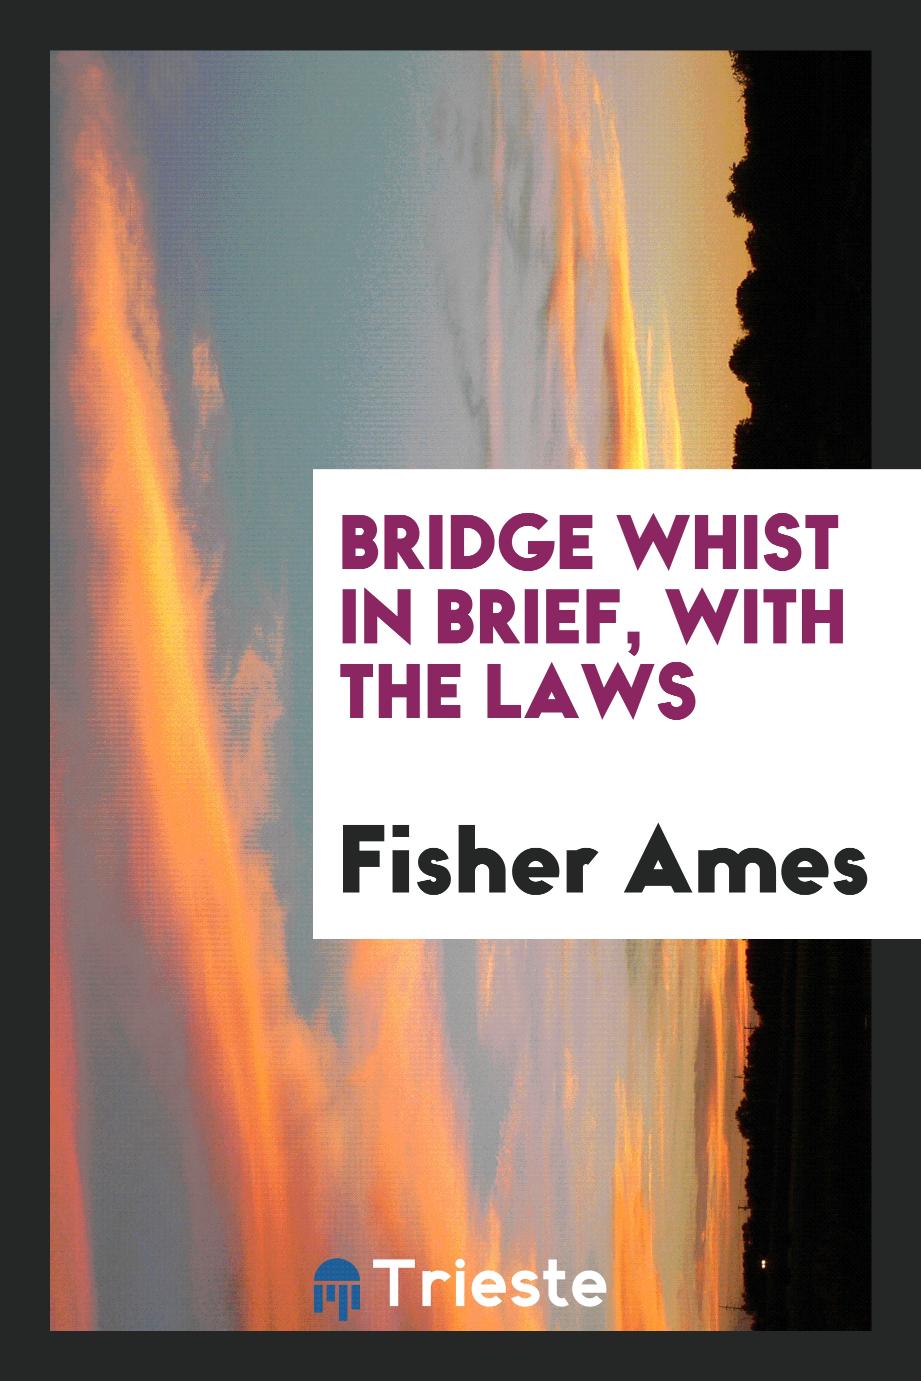 Bridge whist in brief, with the laws